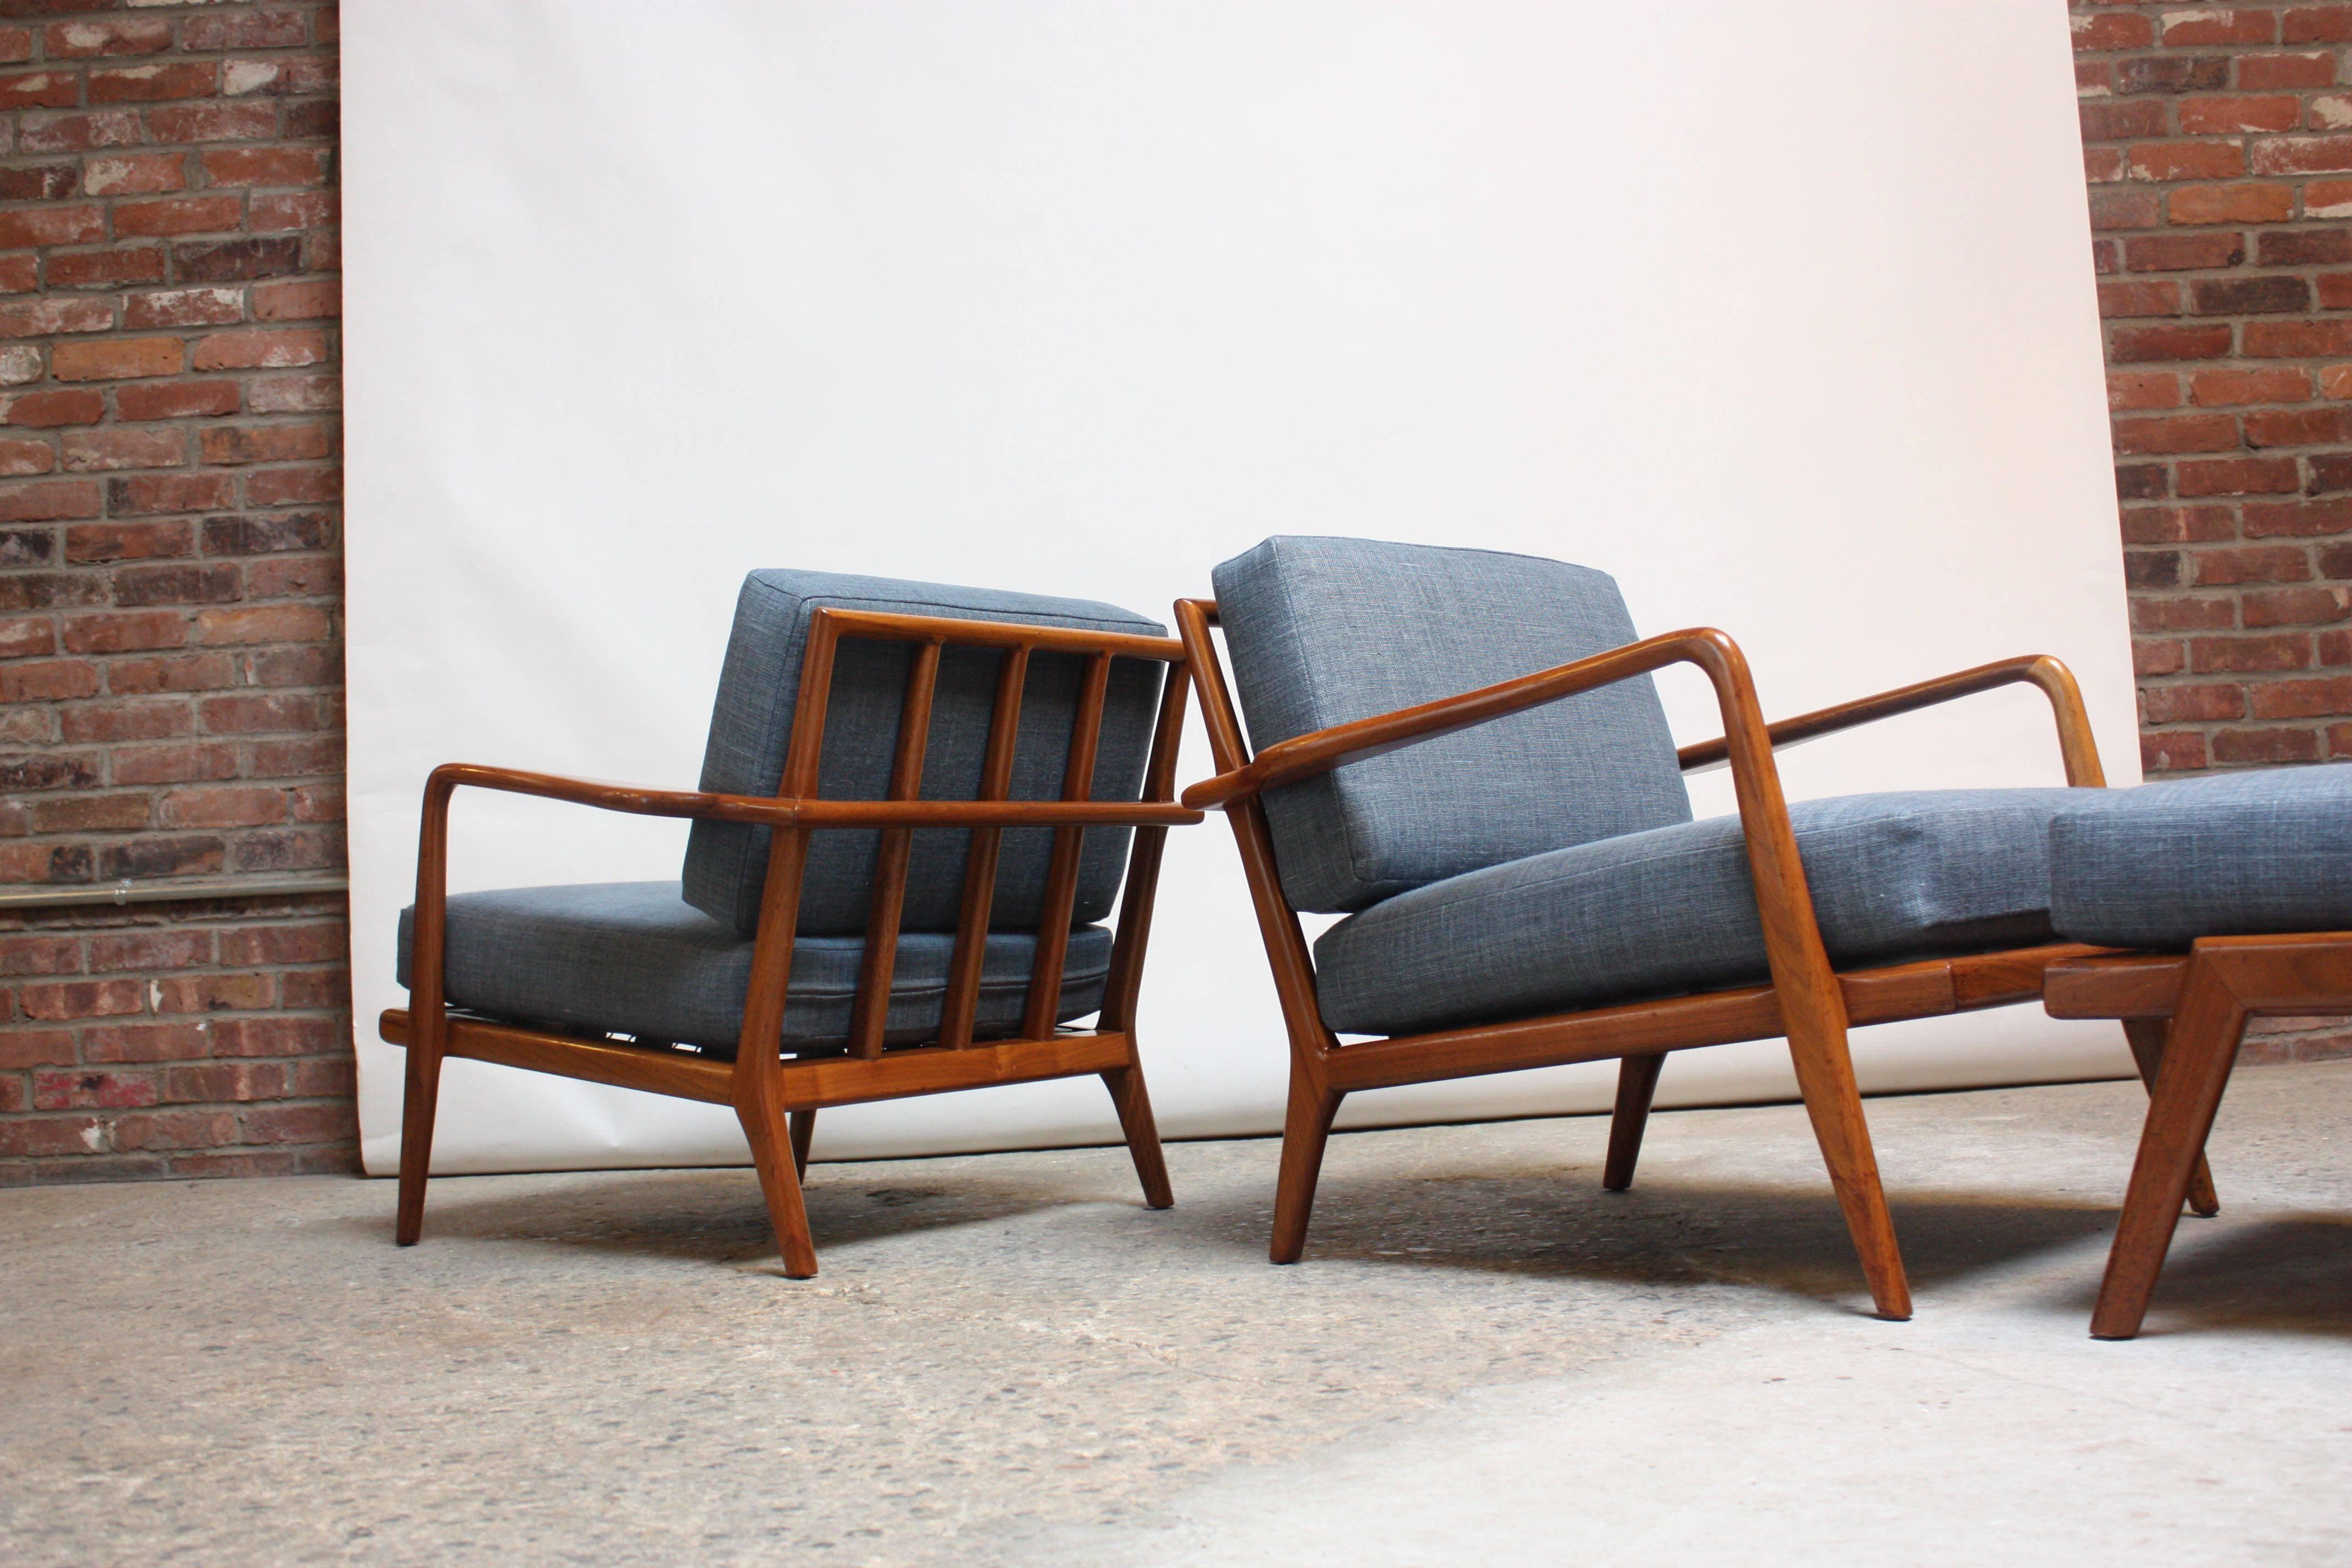 Steel Pair of Mid-Century Walnut Armchairs and Ottoman by Mel Smilow